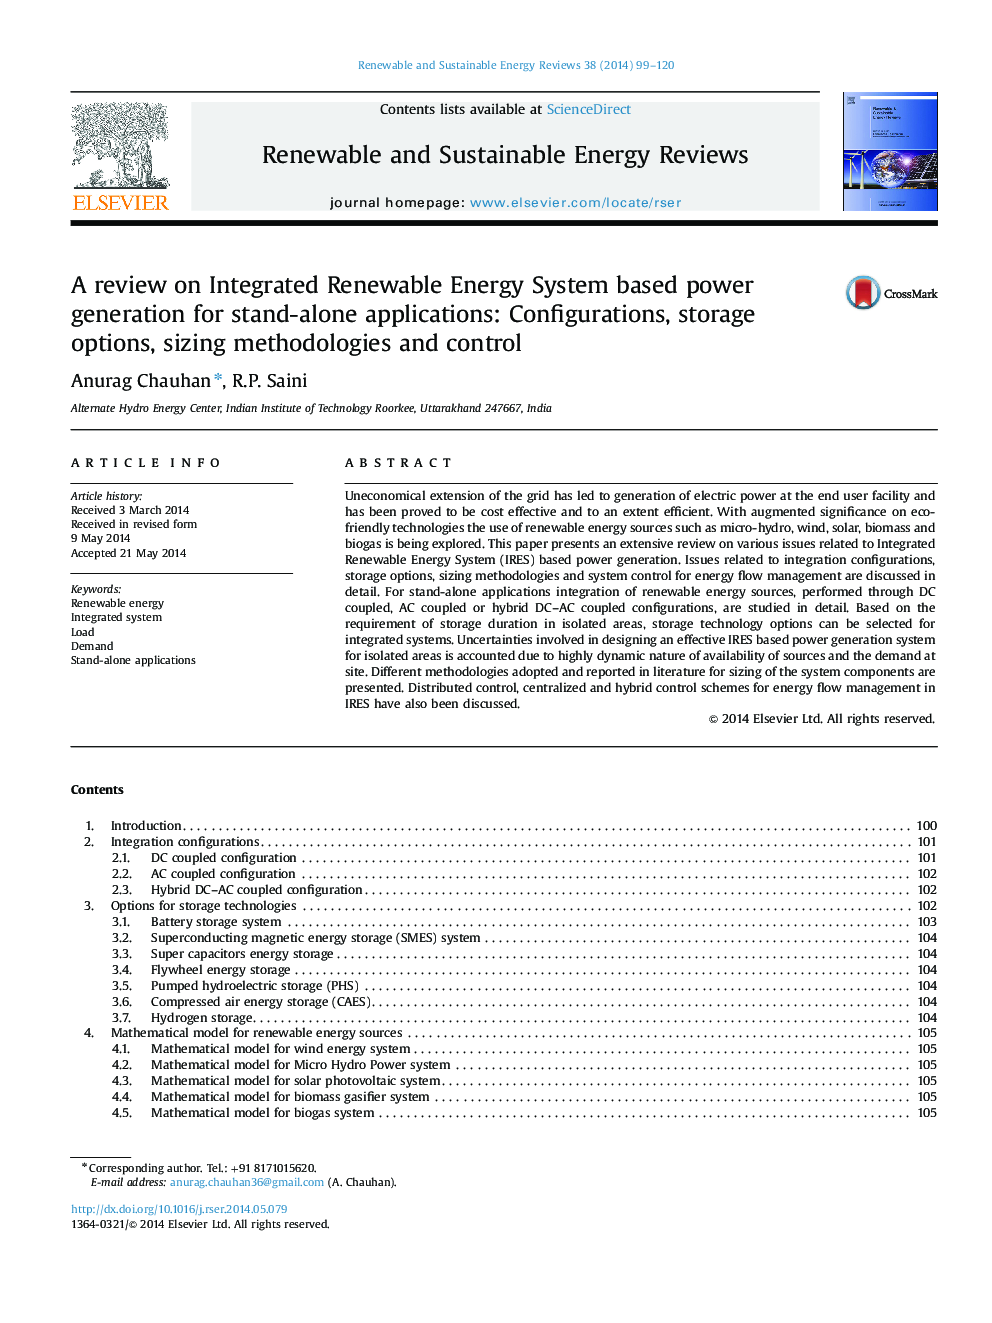 A review on Integrated Renewable Energy System based power generation for stand-alone applications: Configurations, storage options, sizing methodologies and control